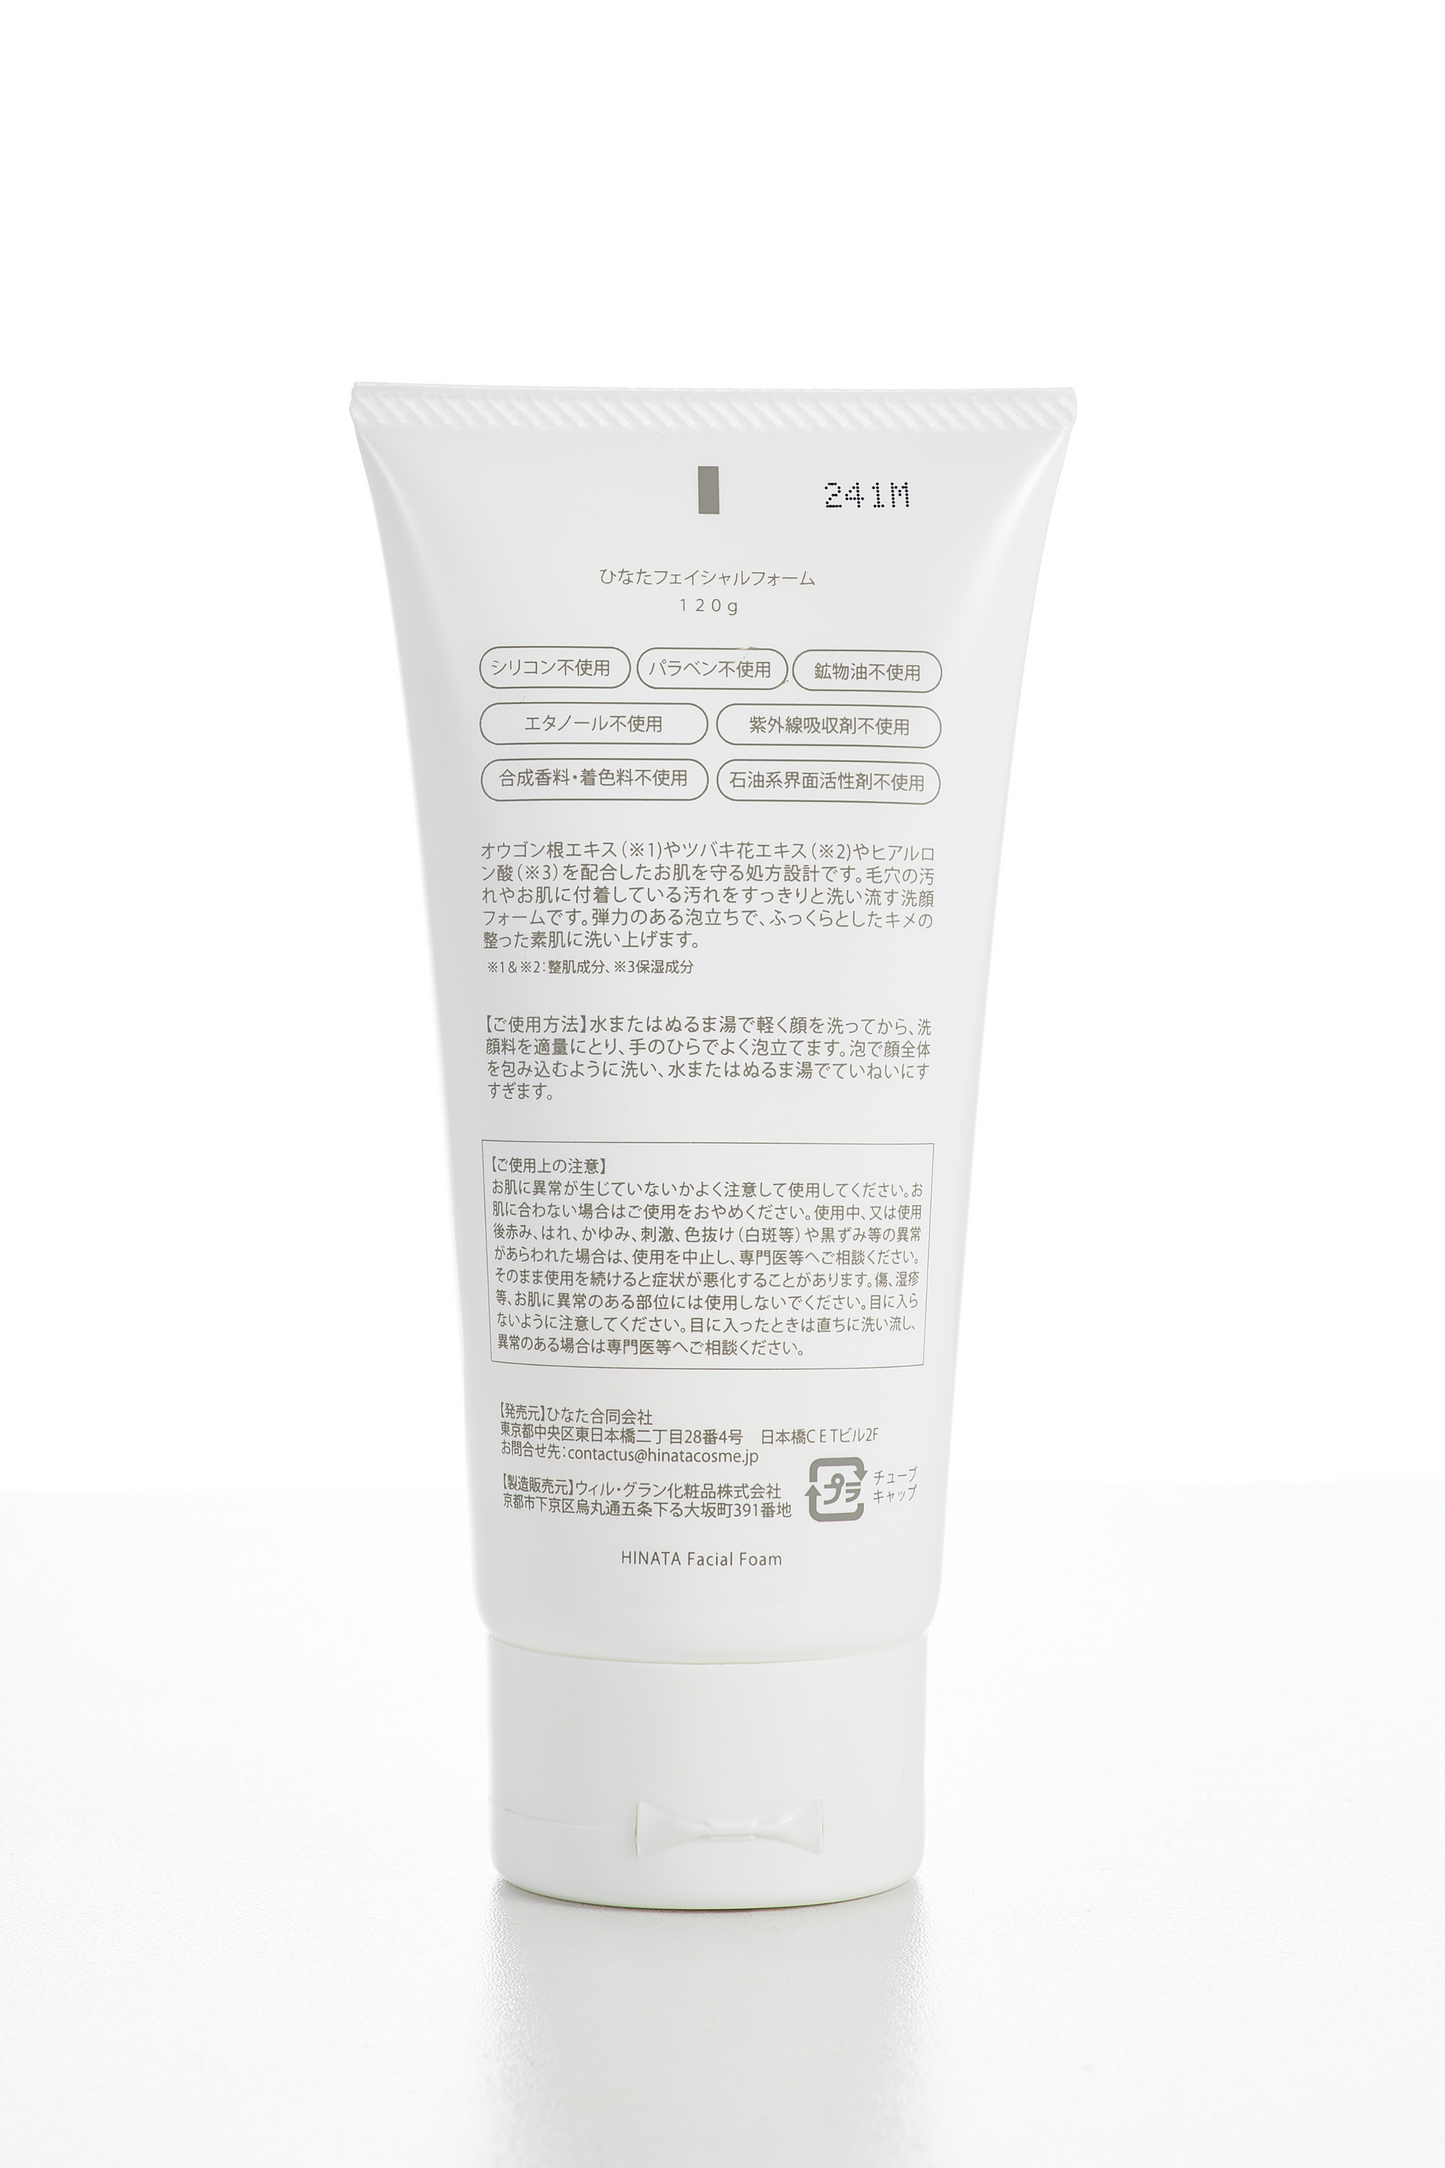 5. HINATA Rich Essence Cleansing Foam: Cleansing and moisturising, anti-pollution